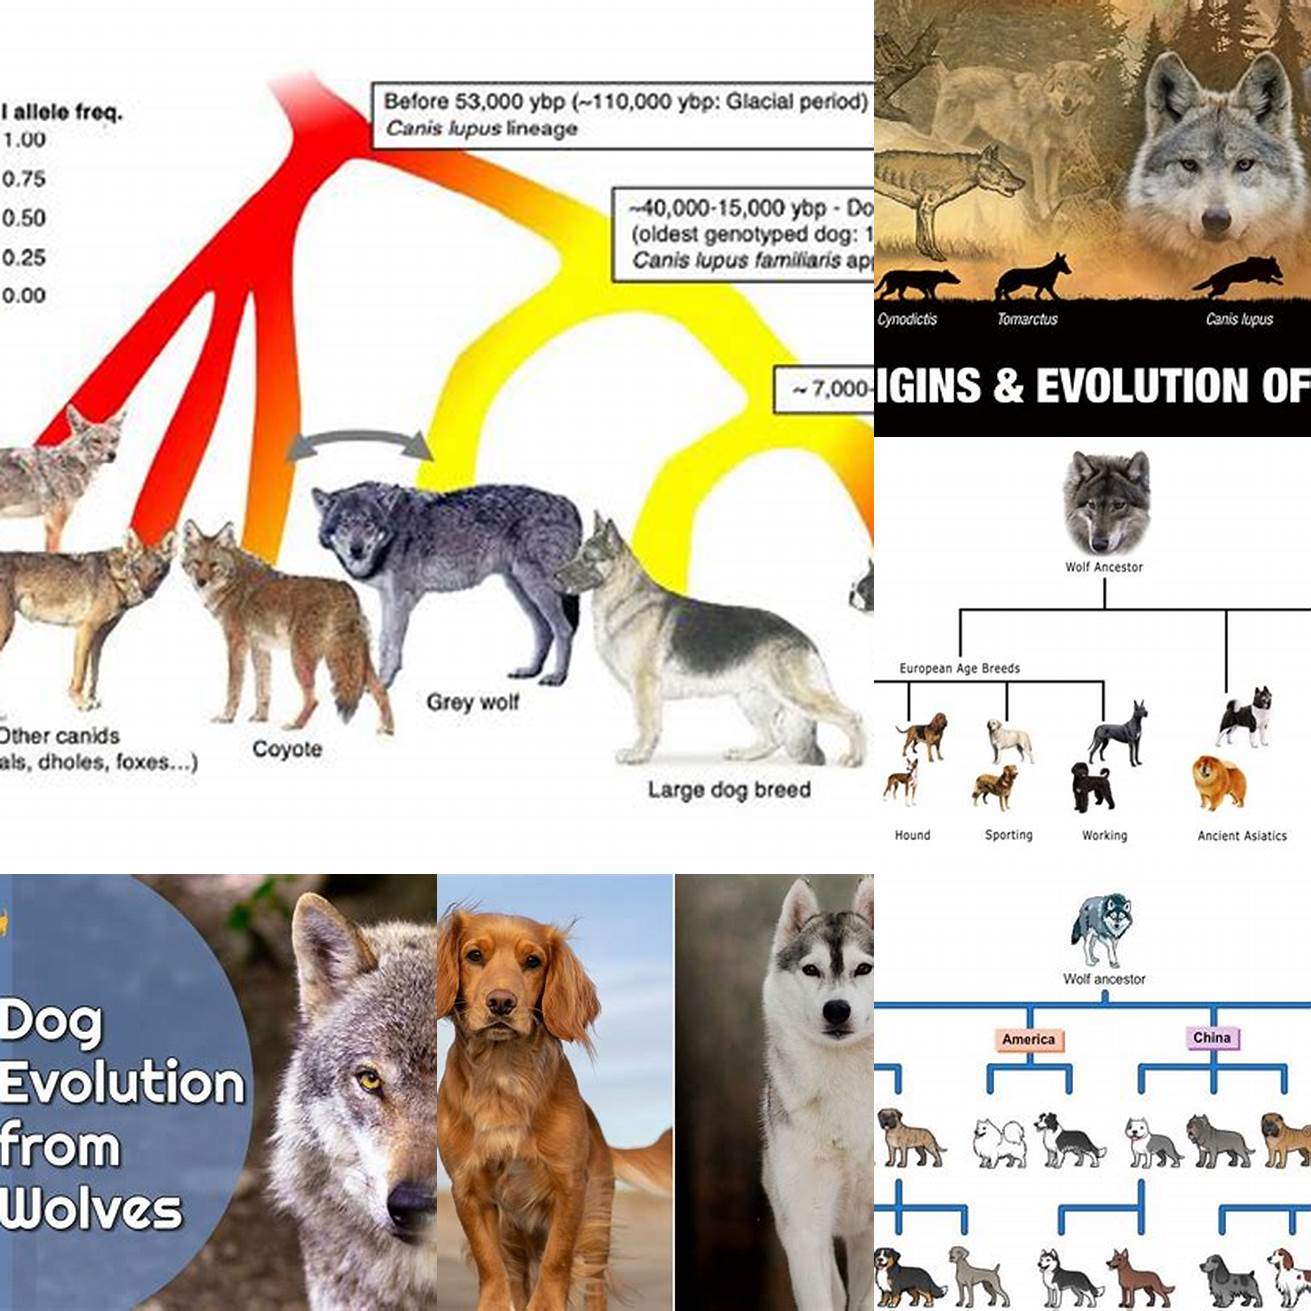 Dogs are descended from wolves